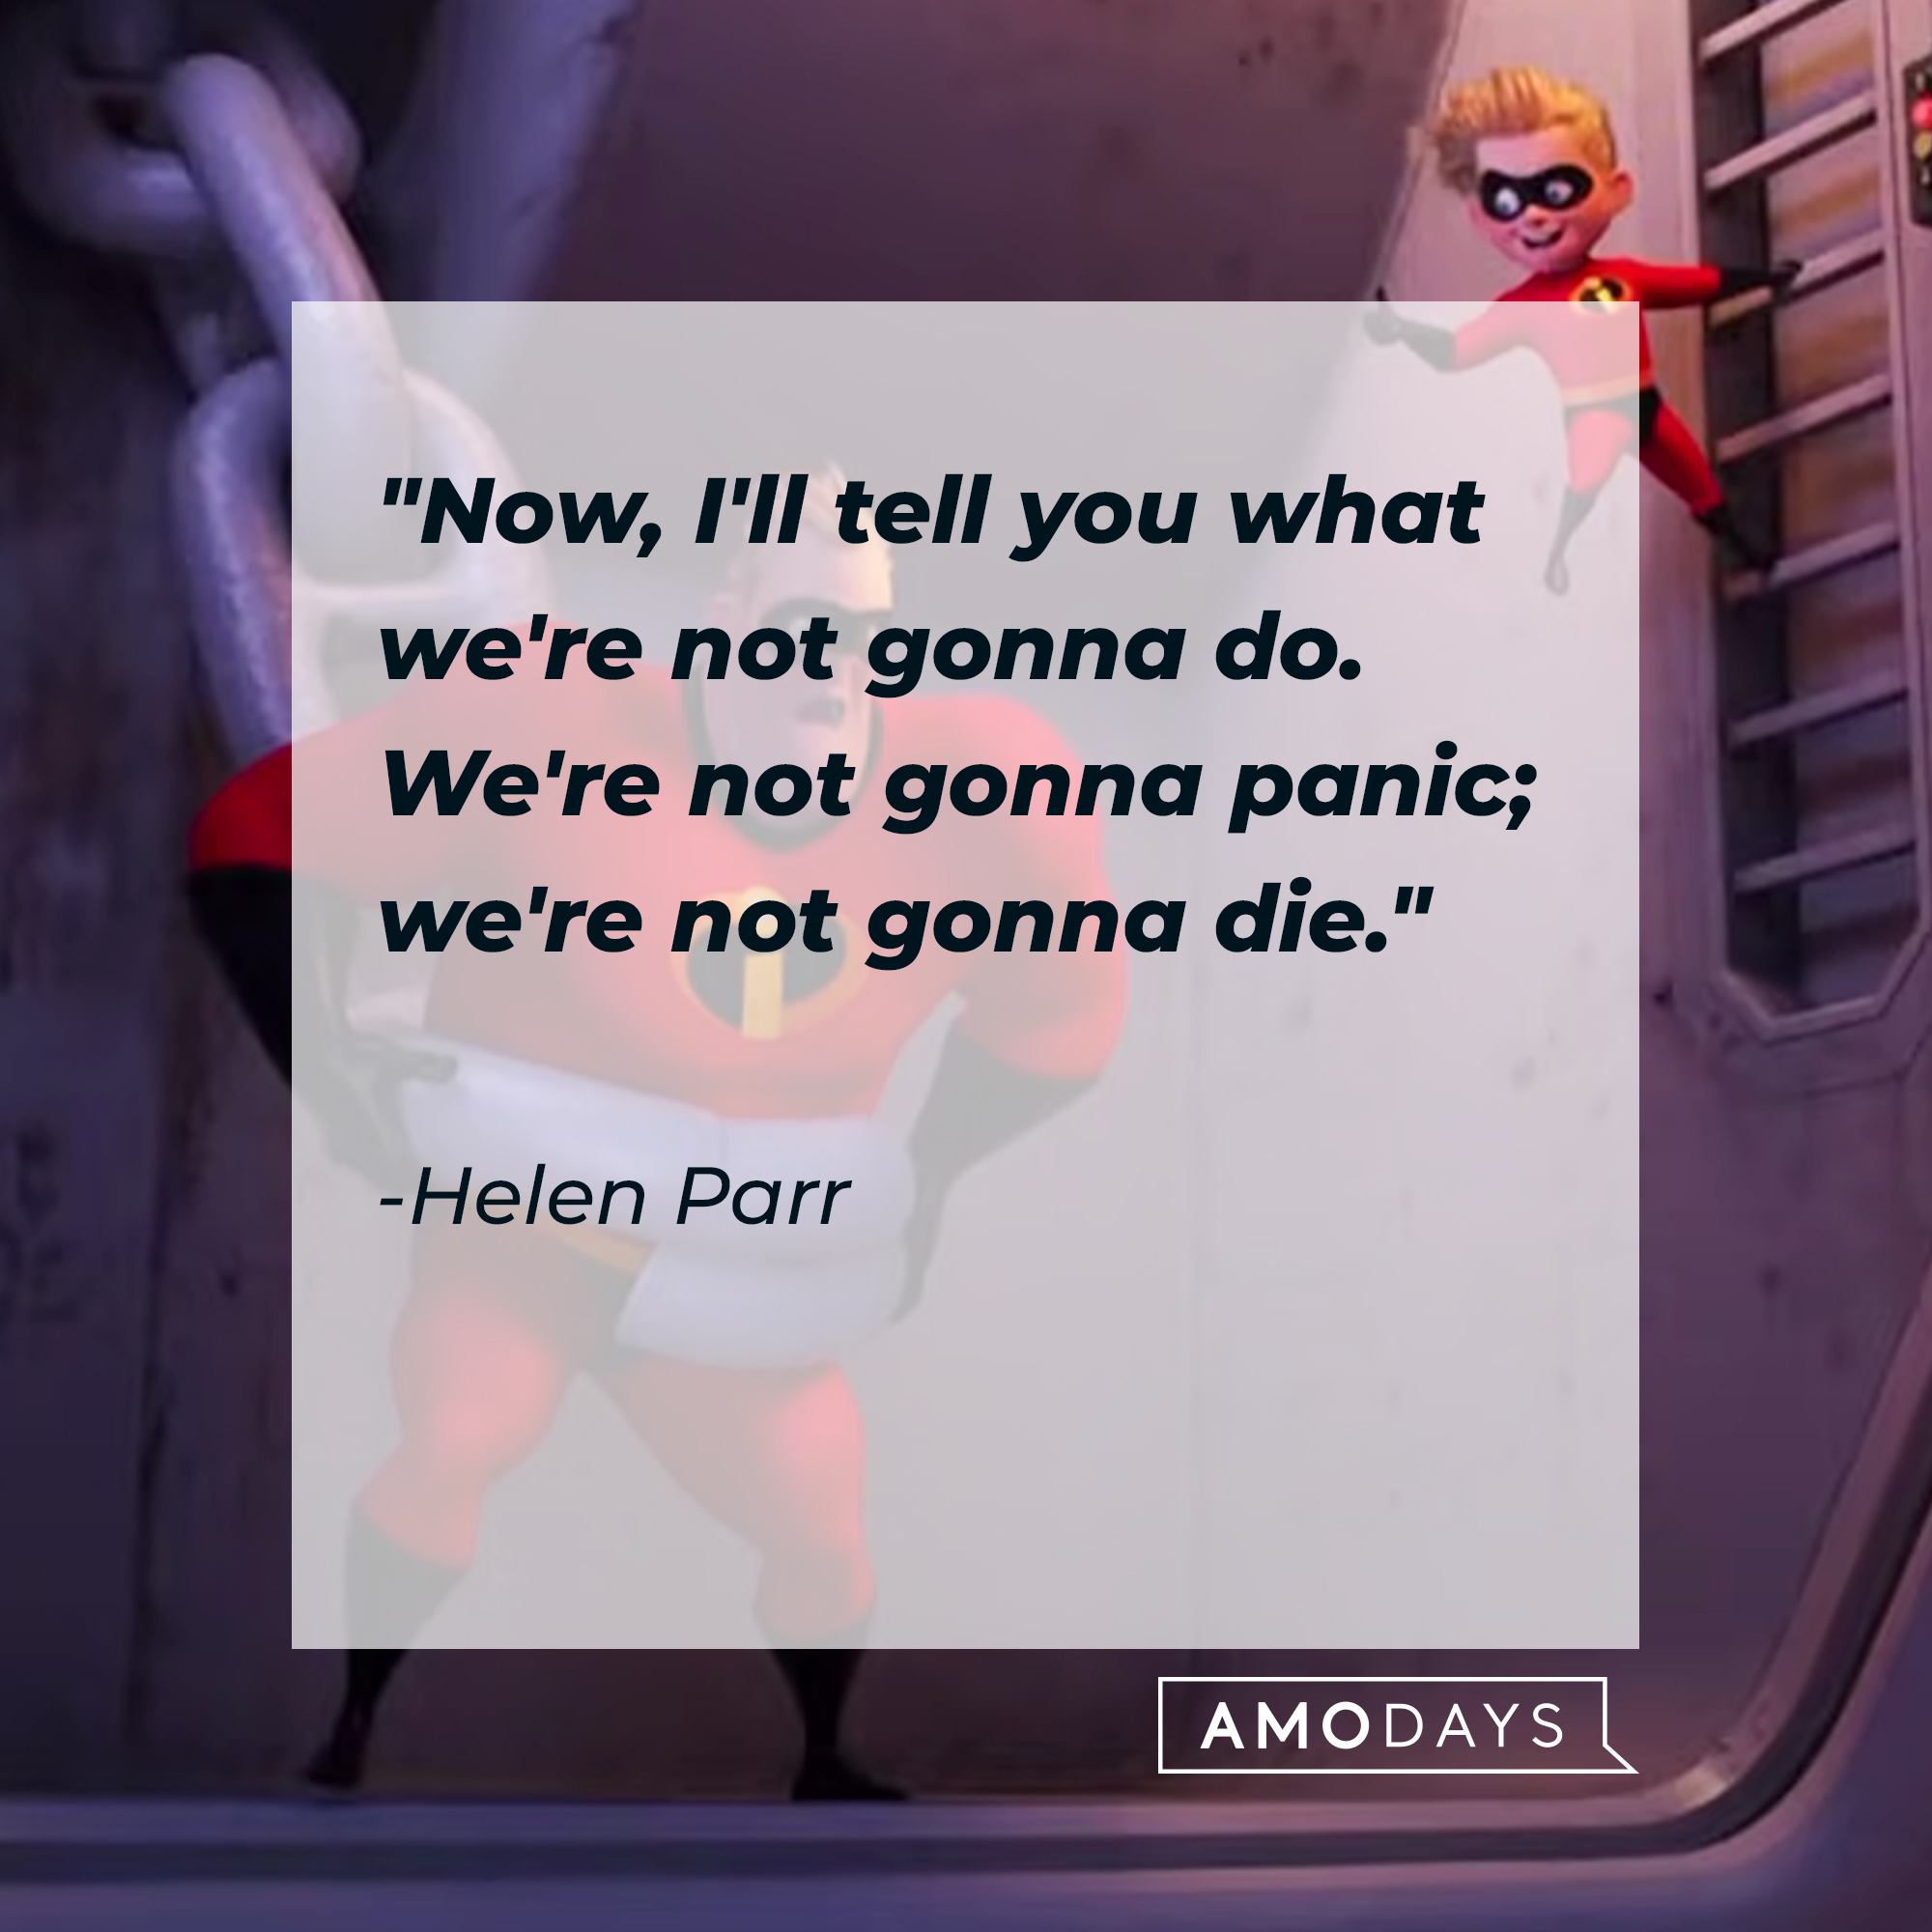 Helen Parr with her quote: "Now, I'll tell you what we're not gonna do. We're not gonna panic; we're not gonna die." | Source: Youtube/pixar